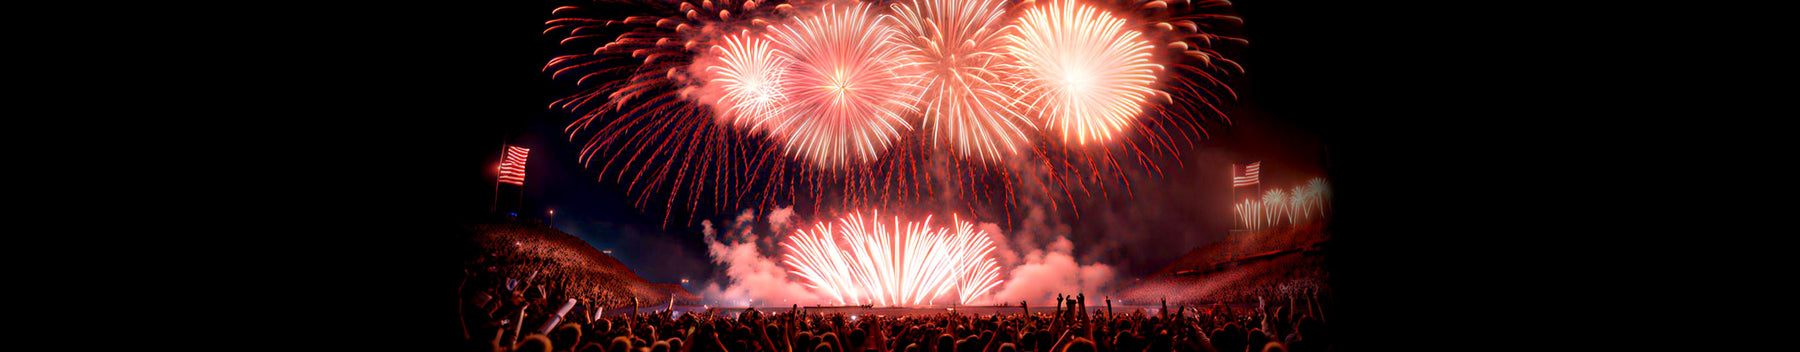 Taylor Swift-Inspired Fireworks Show Breaks World Record at the 2023 US Fireworks Championship